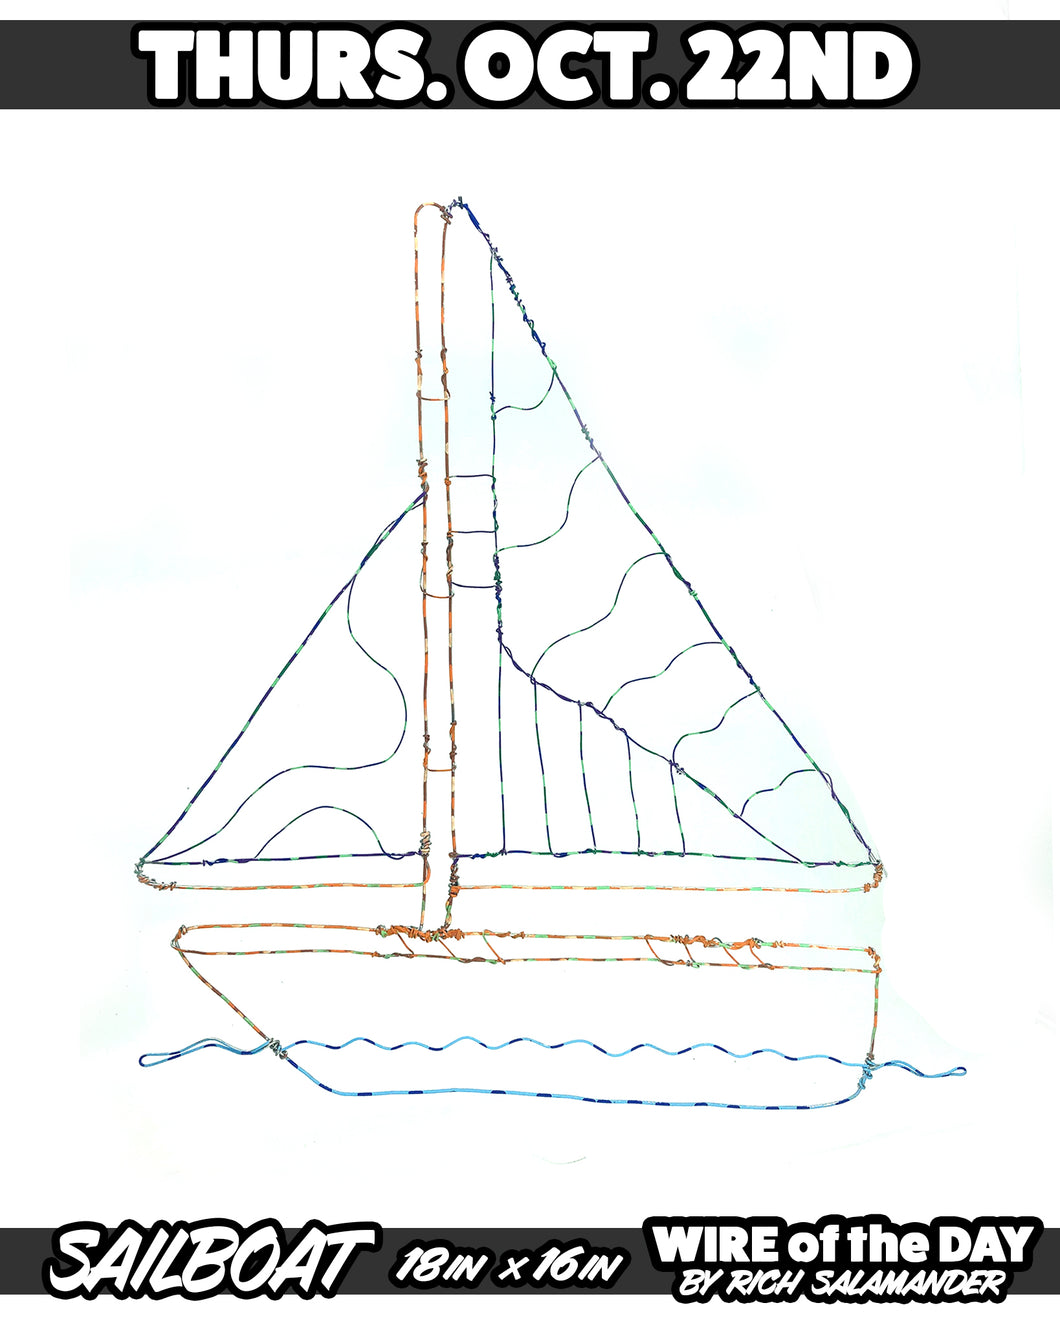 WIRE of the DAY SAILBOAT